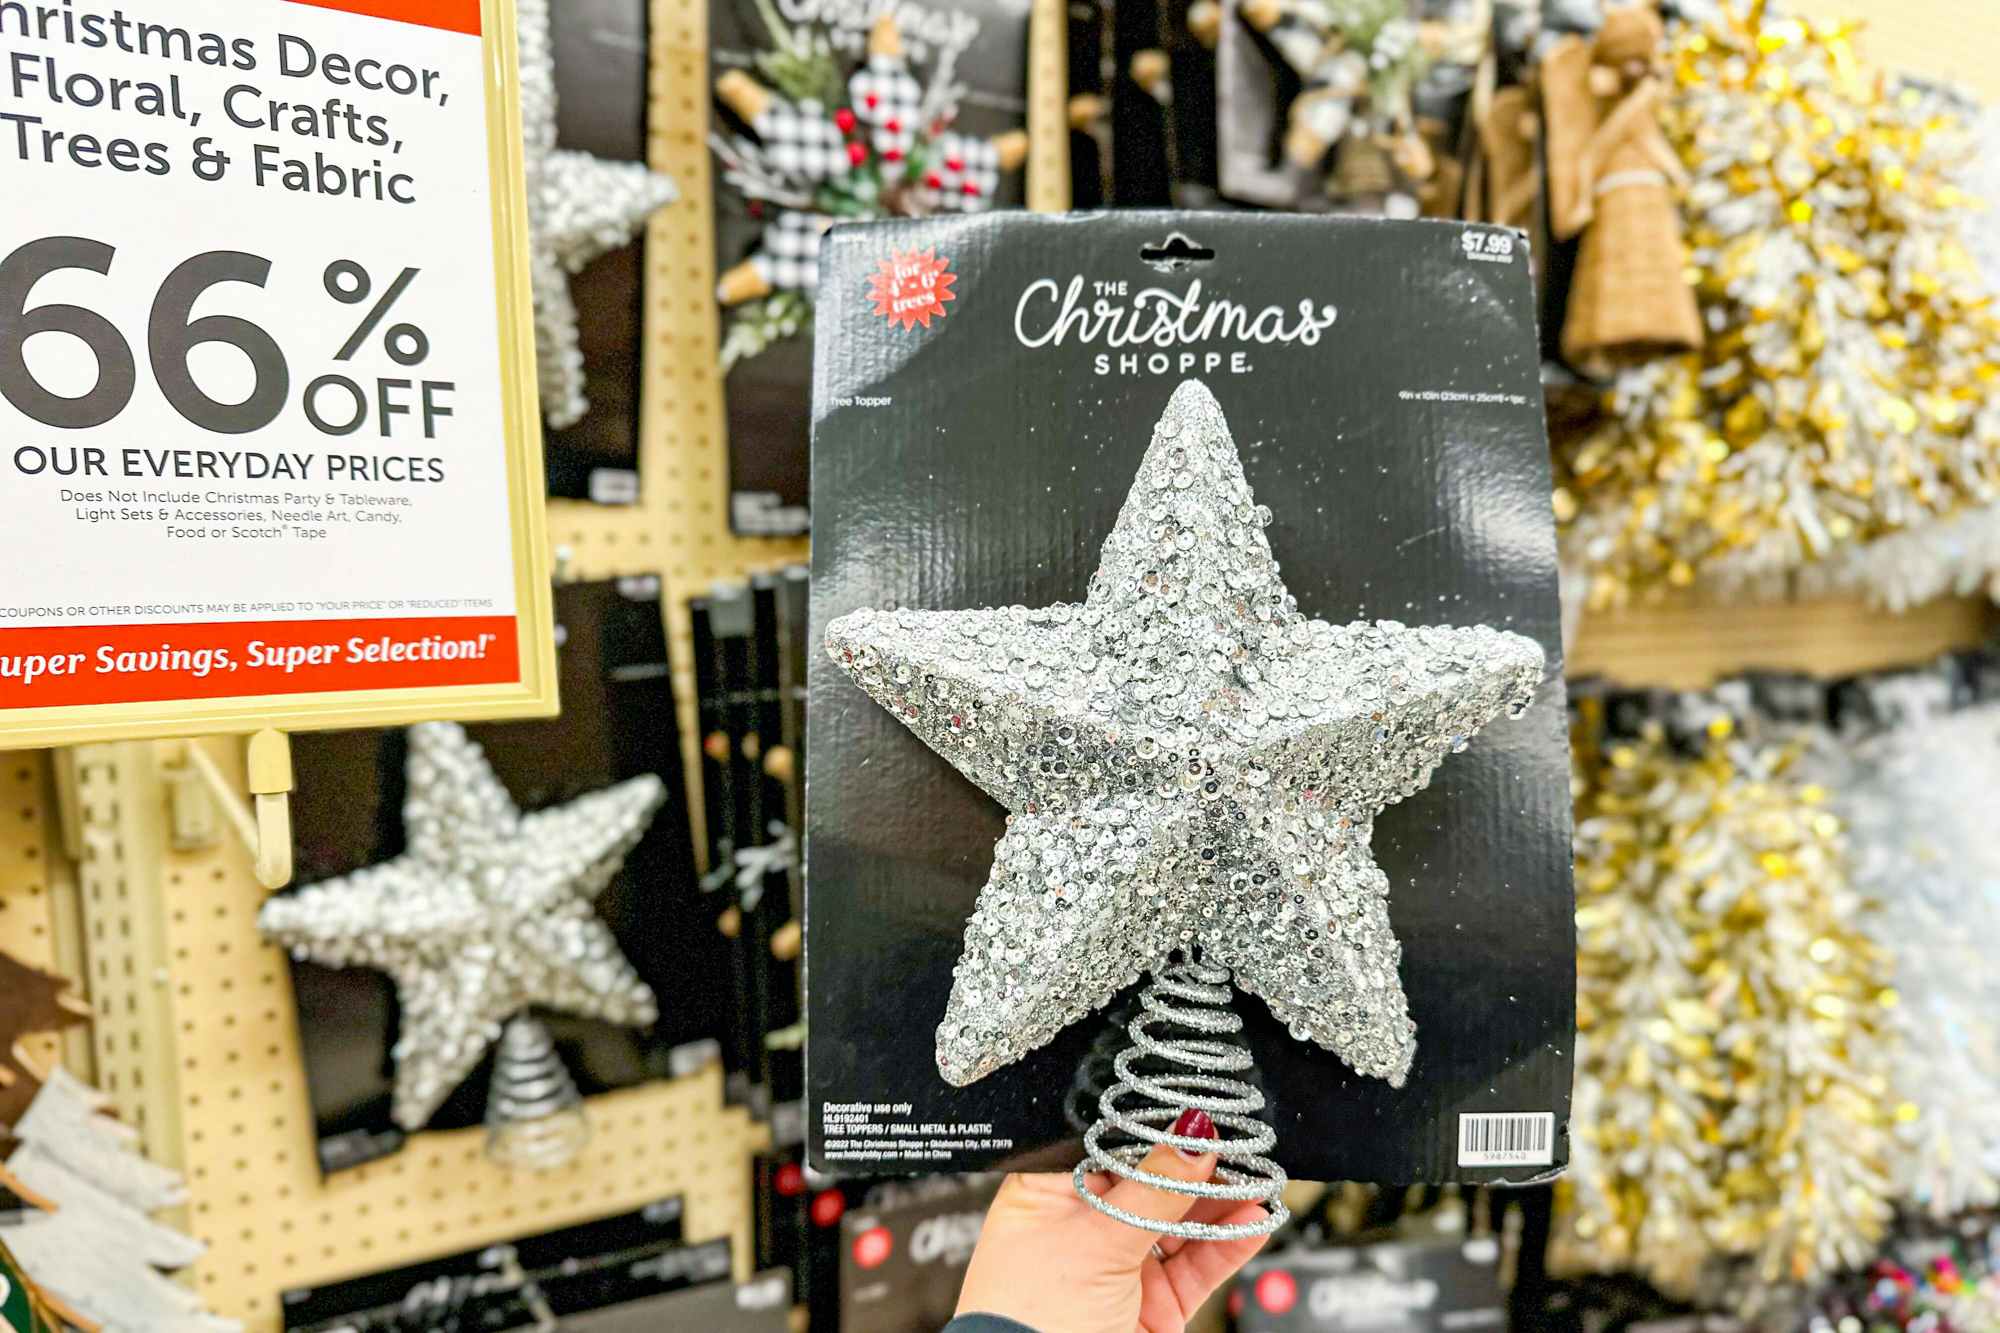 Hobby Lobby Christmas decor is top notch this year! Give me it